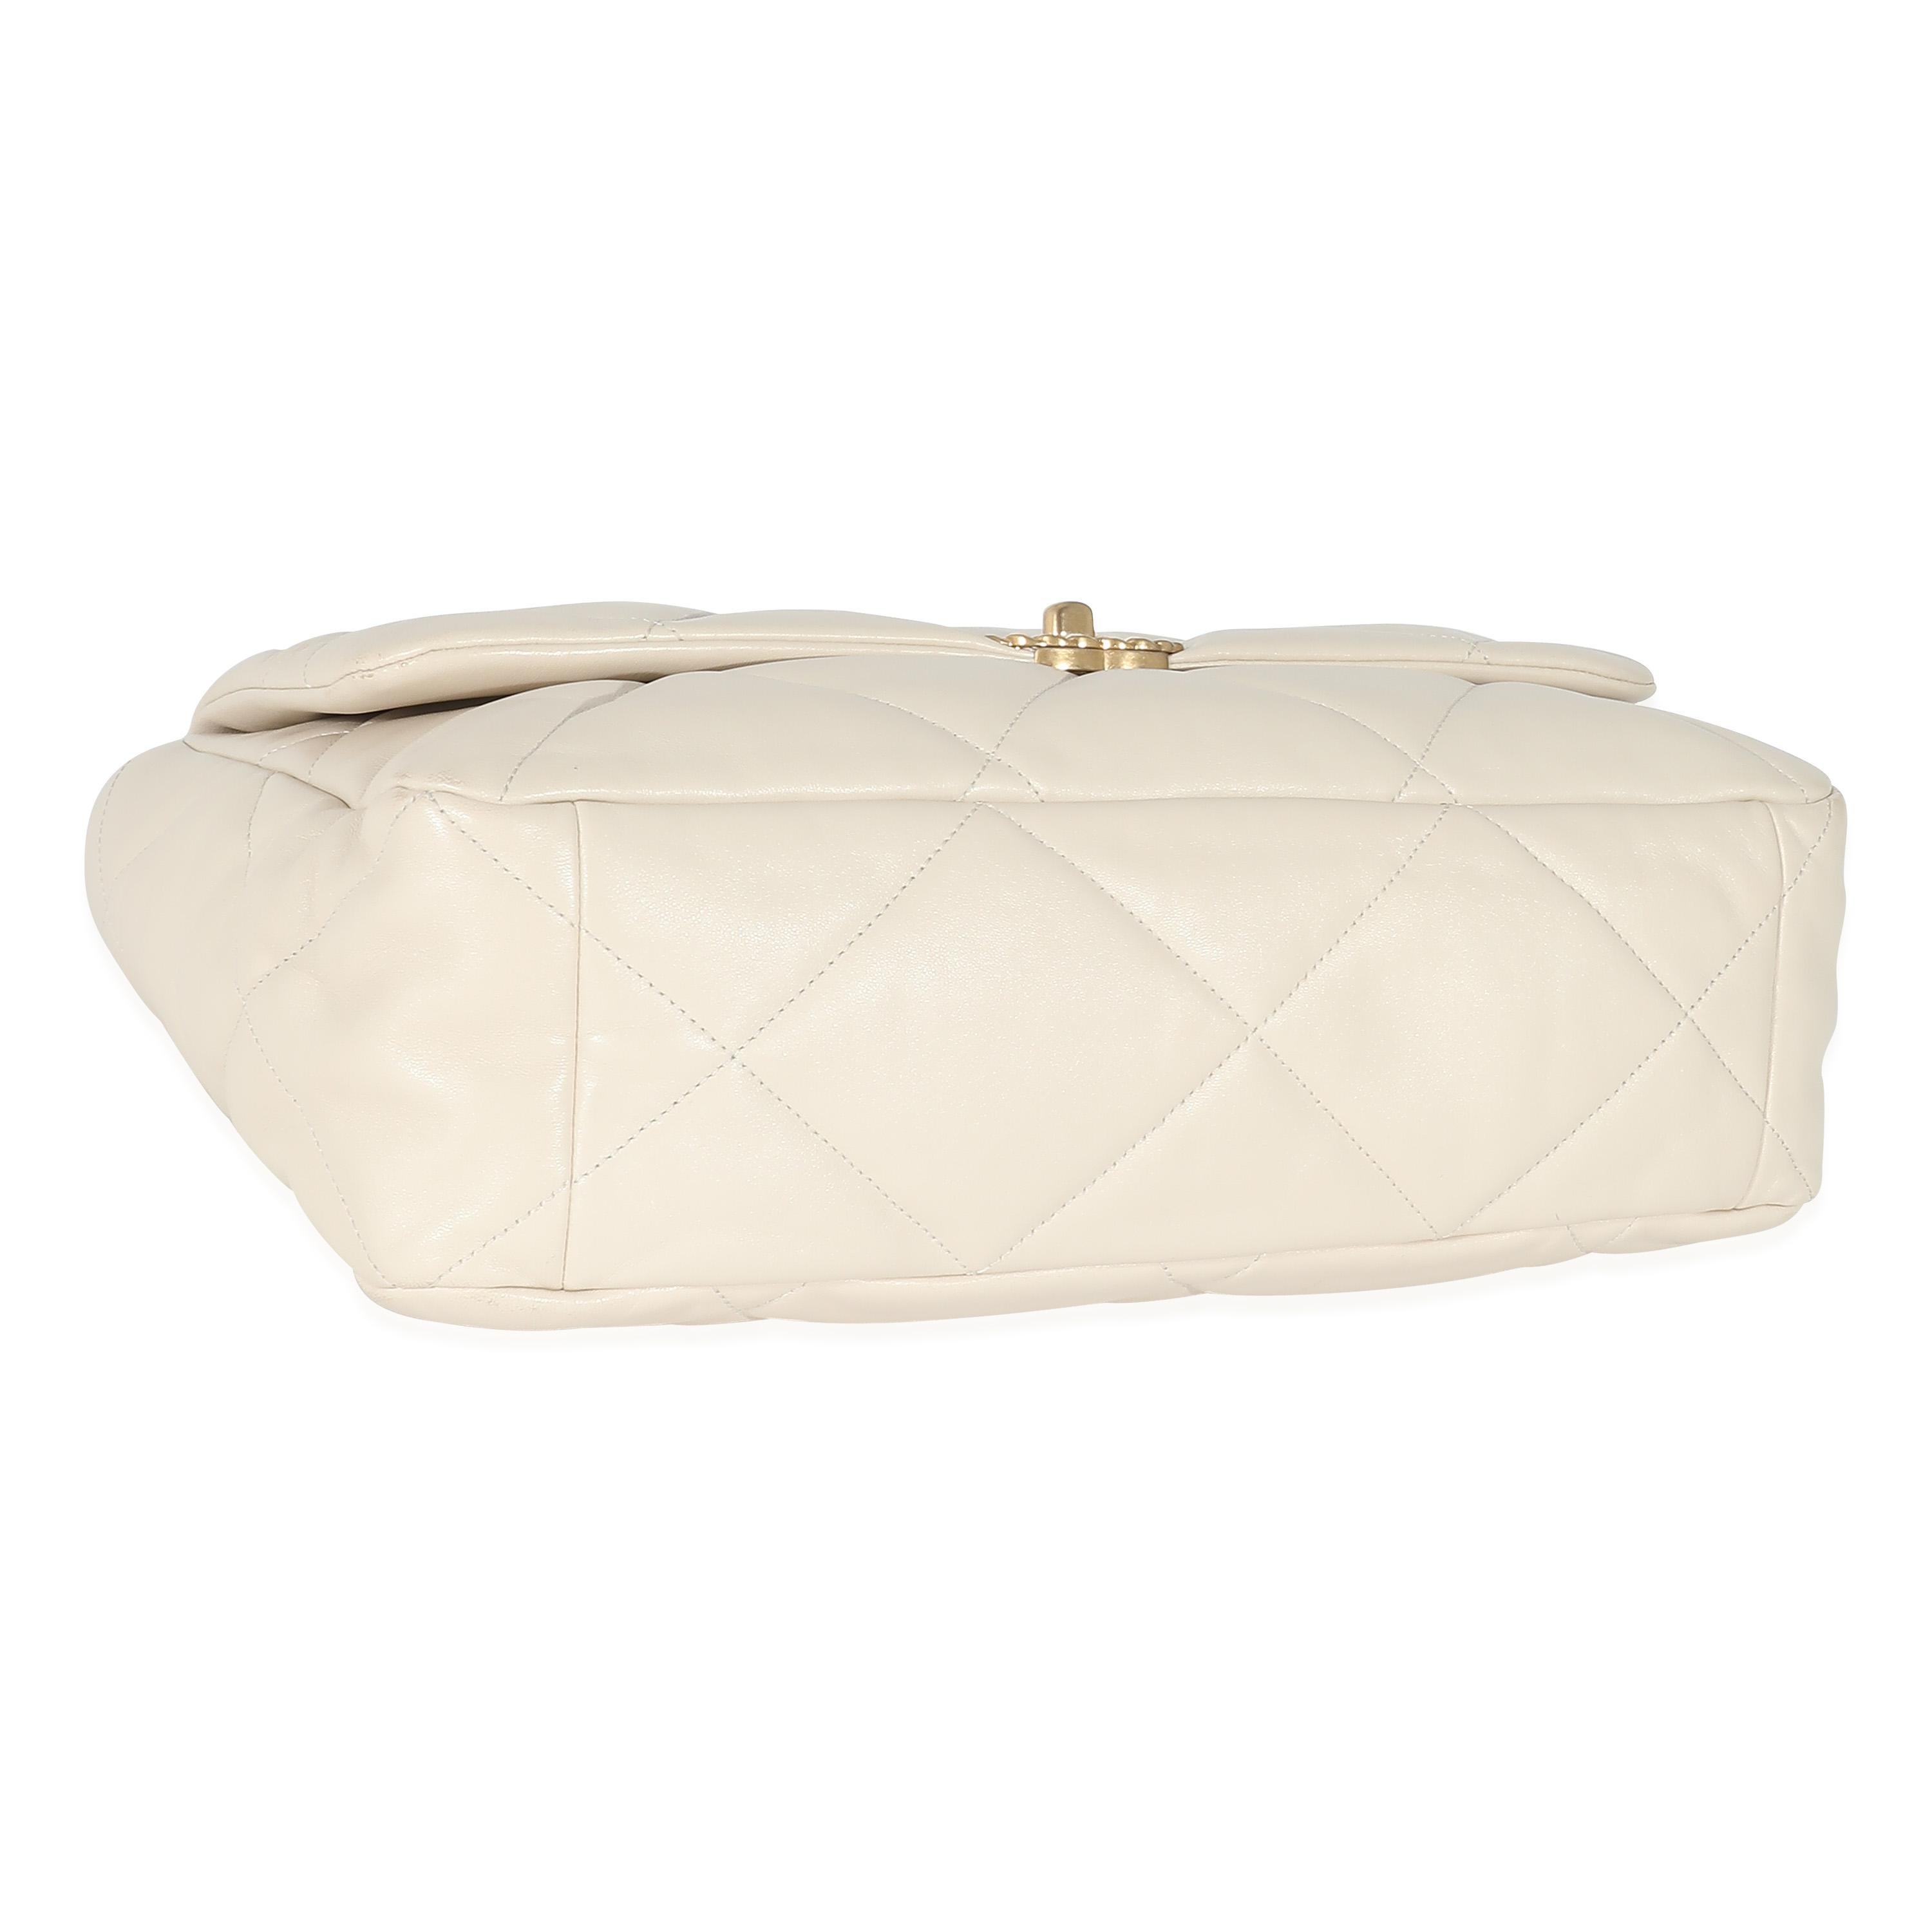 Chanel Ivory Shiny Quilted Lambskin Maxi Chanel 19 Flap Bag 1